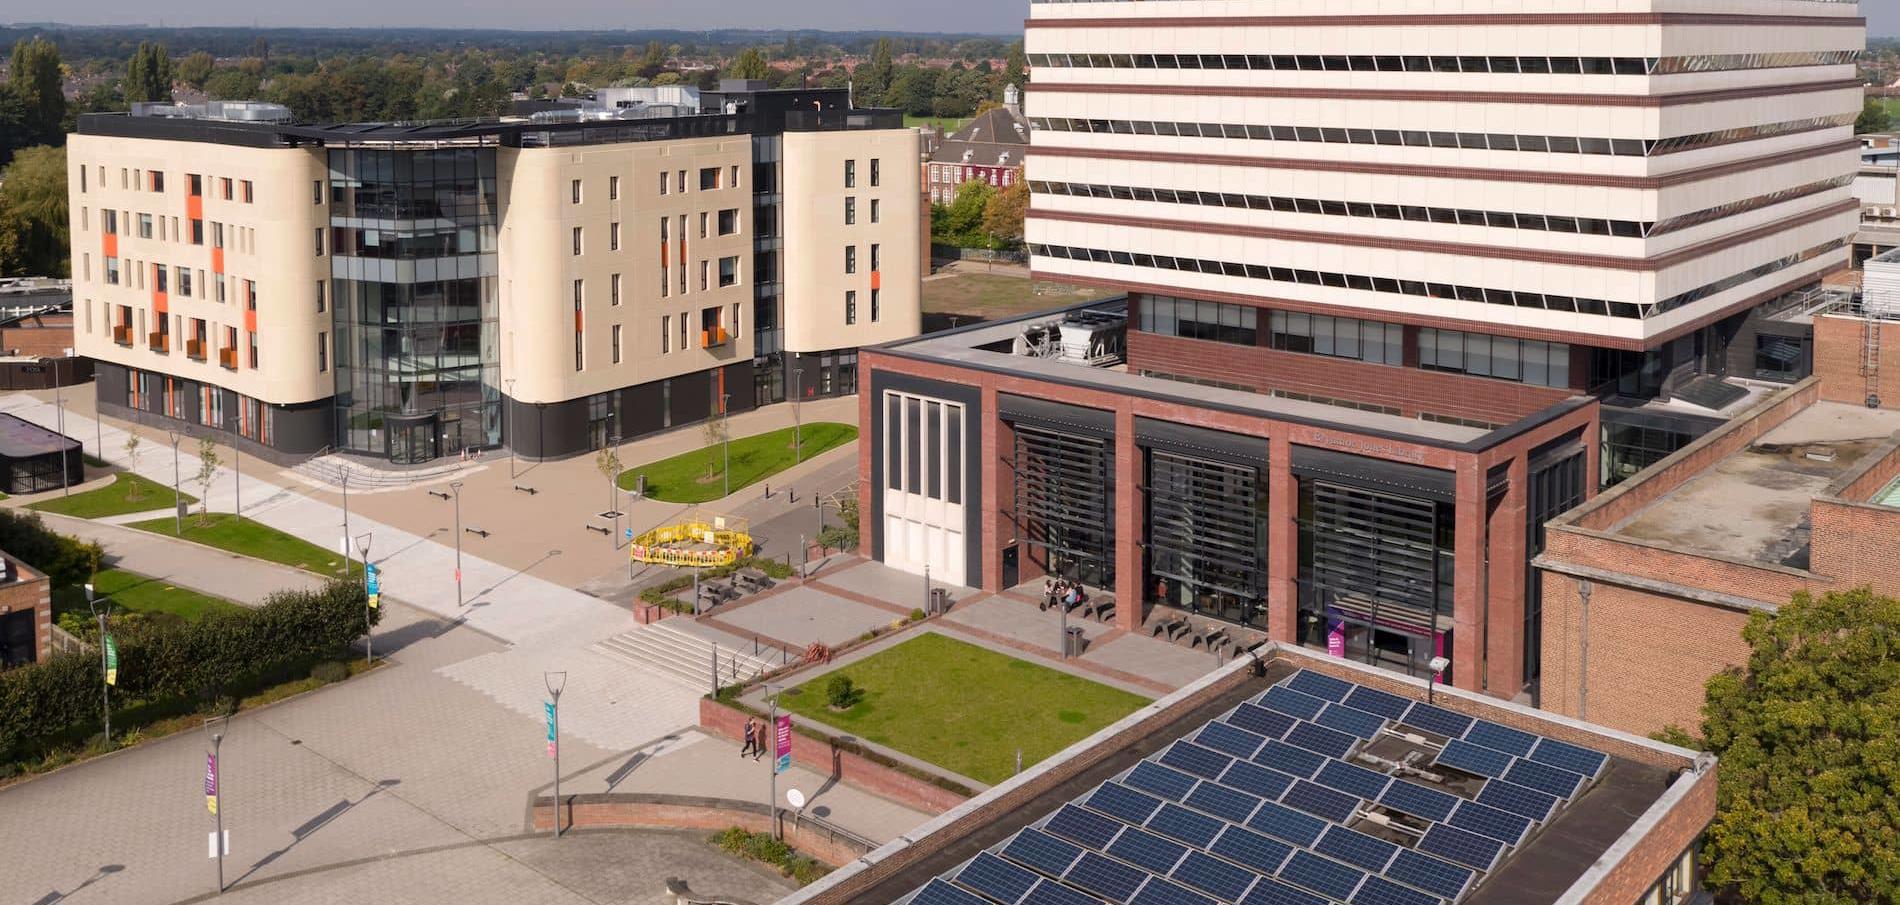 Allam Medical Building and Brynmor Jones Library with Larkin Solar Panels